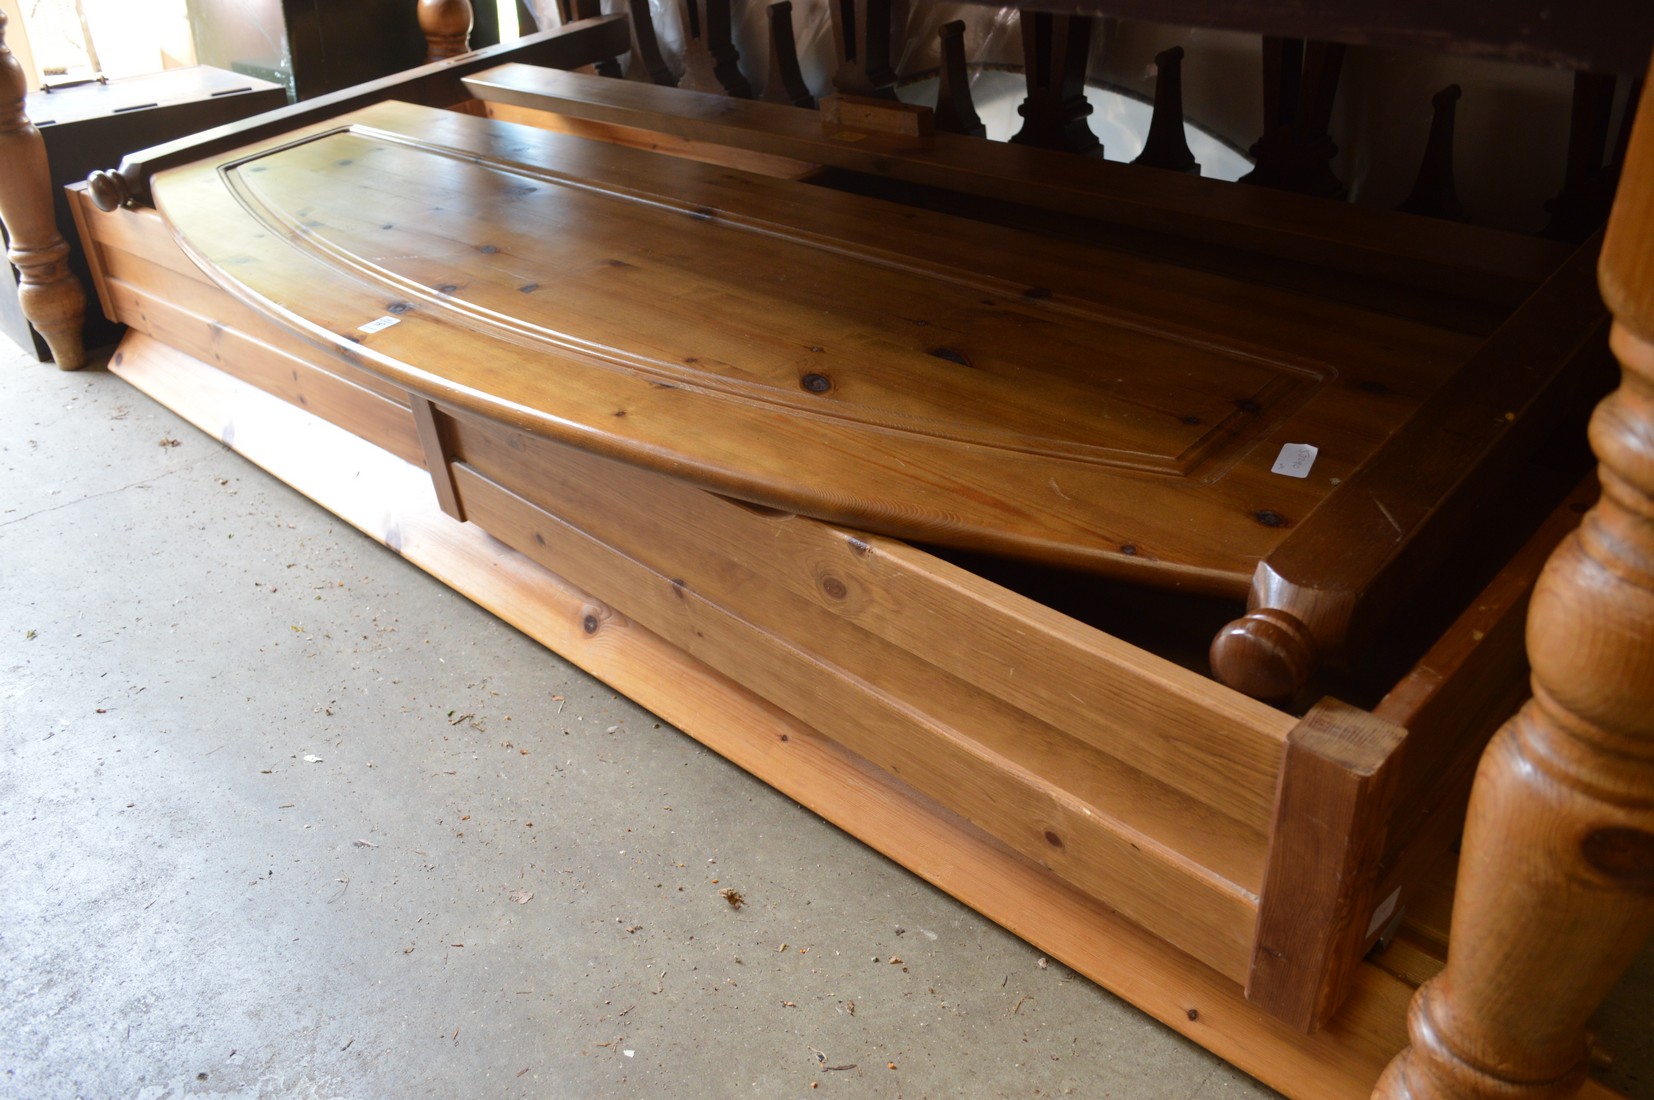 Pine bed frame with underbed storage drawers.